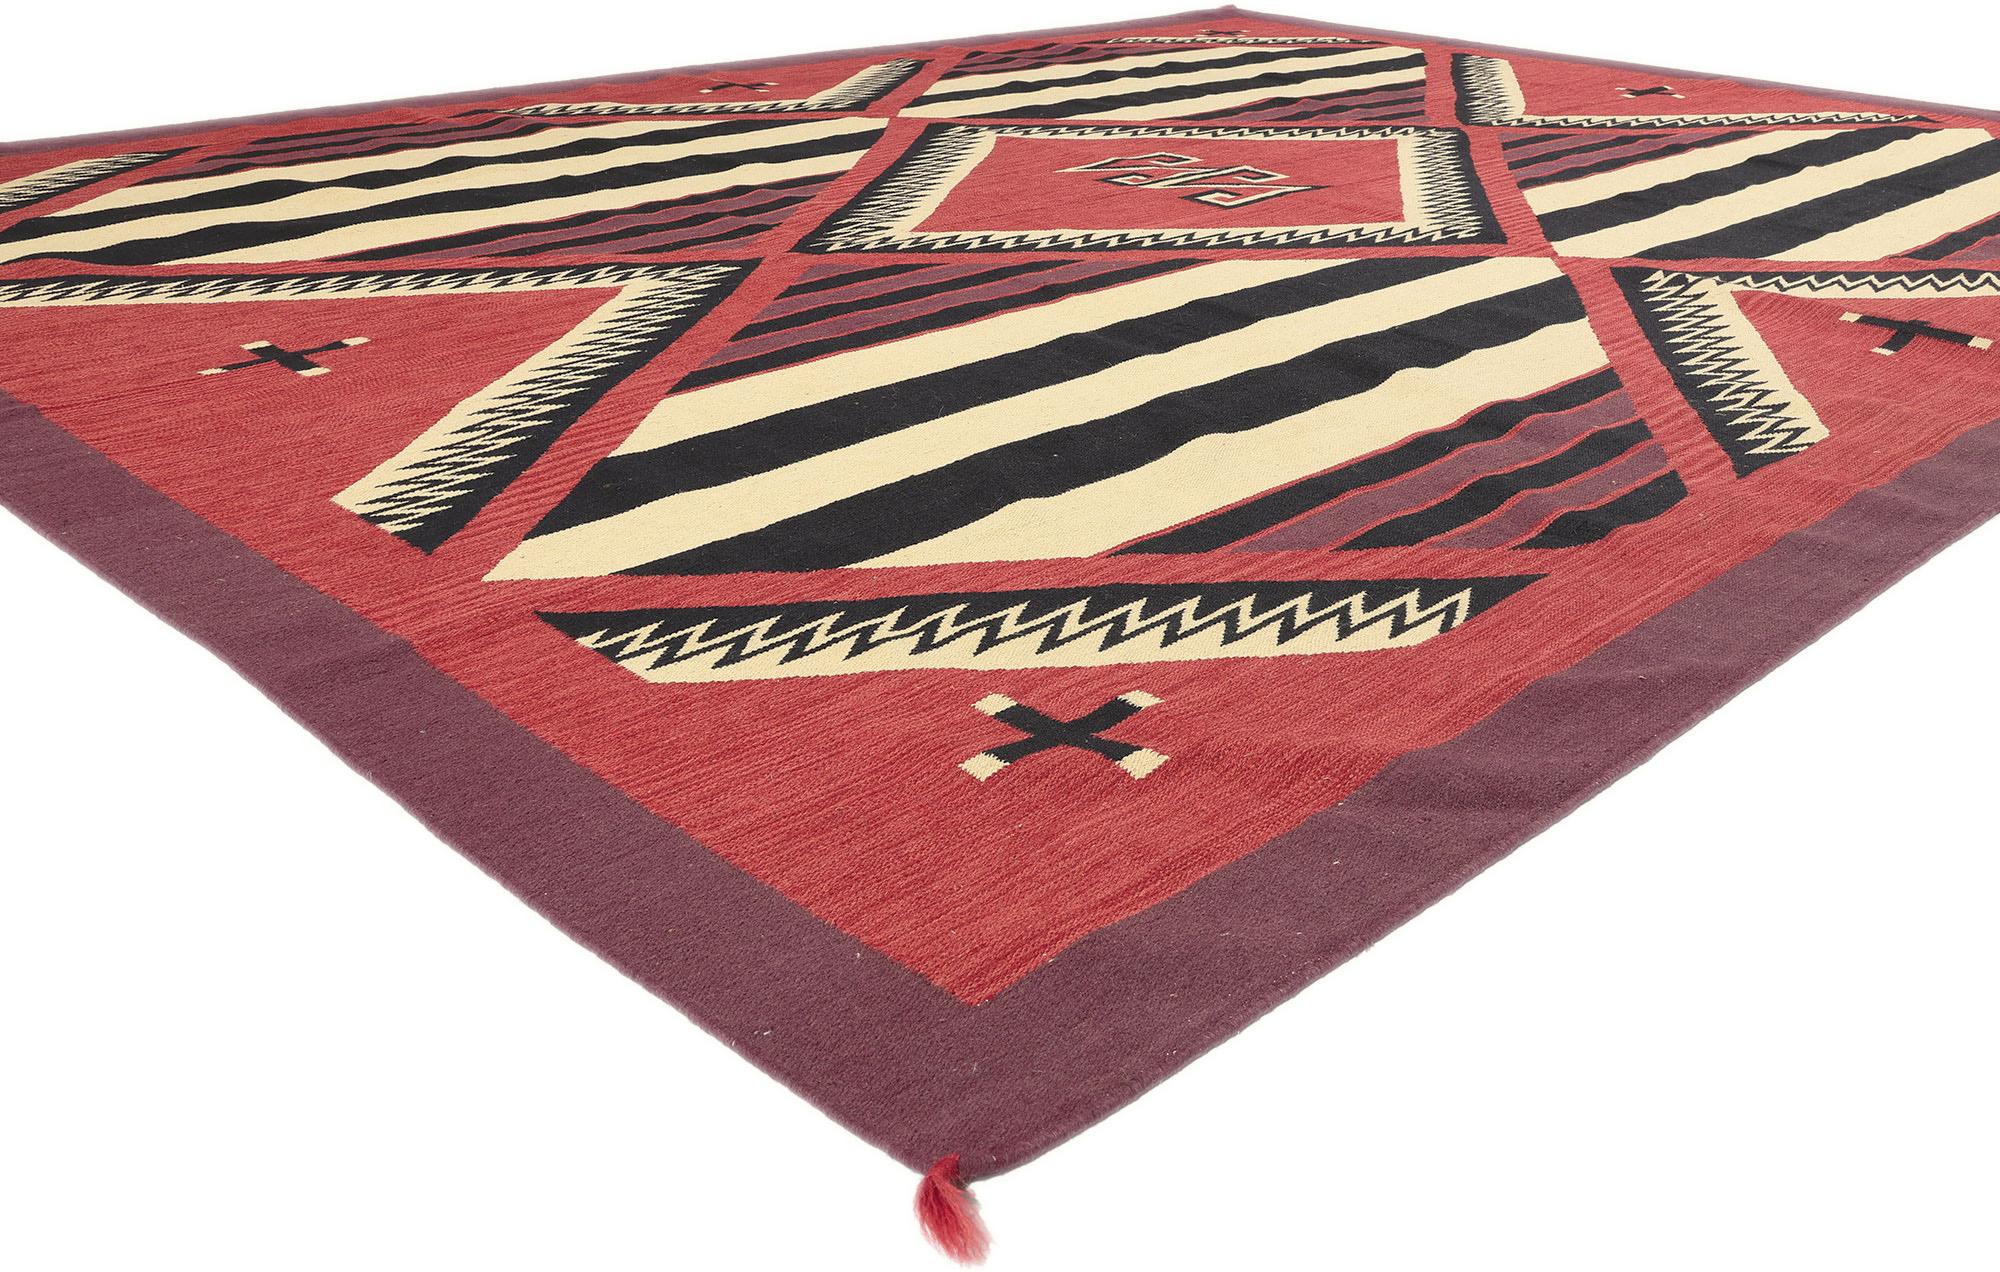 81029 Southwest Modern Chief Blanket Navajo-Style Rug, 09'00 x 12'00. Embark on an enchanting journey immersed in sunbaked warmth with this handwoven wool Chief Blanket Navajo-style rug. A testament to the seamless fusion of Contemporary Santa Fe